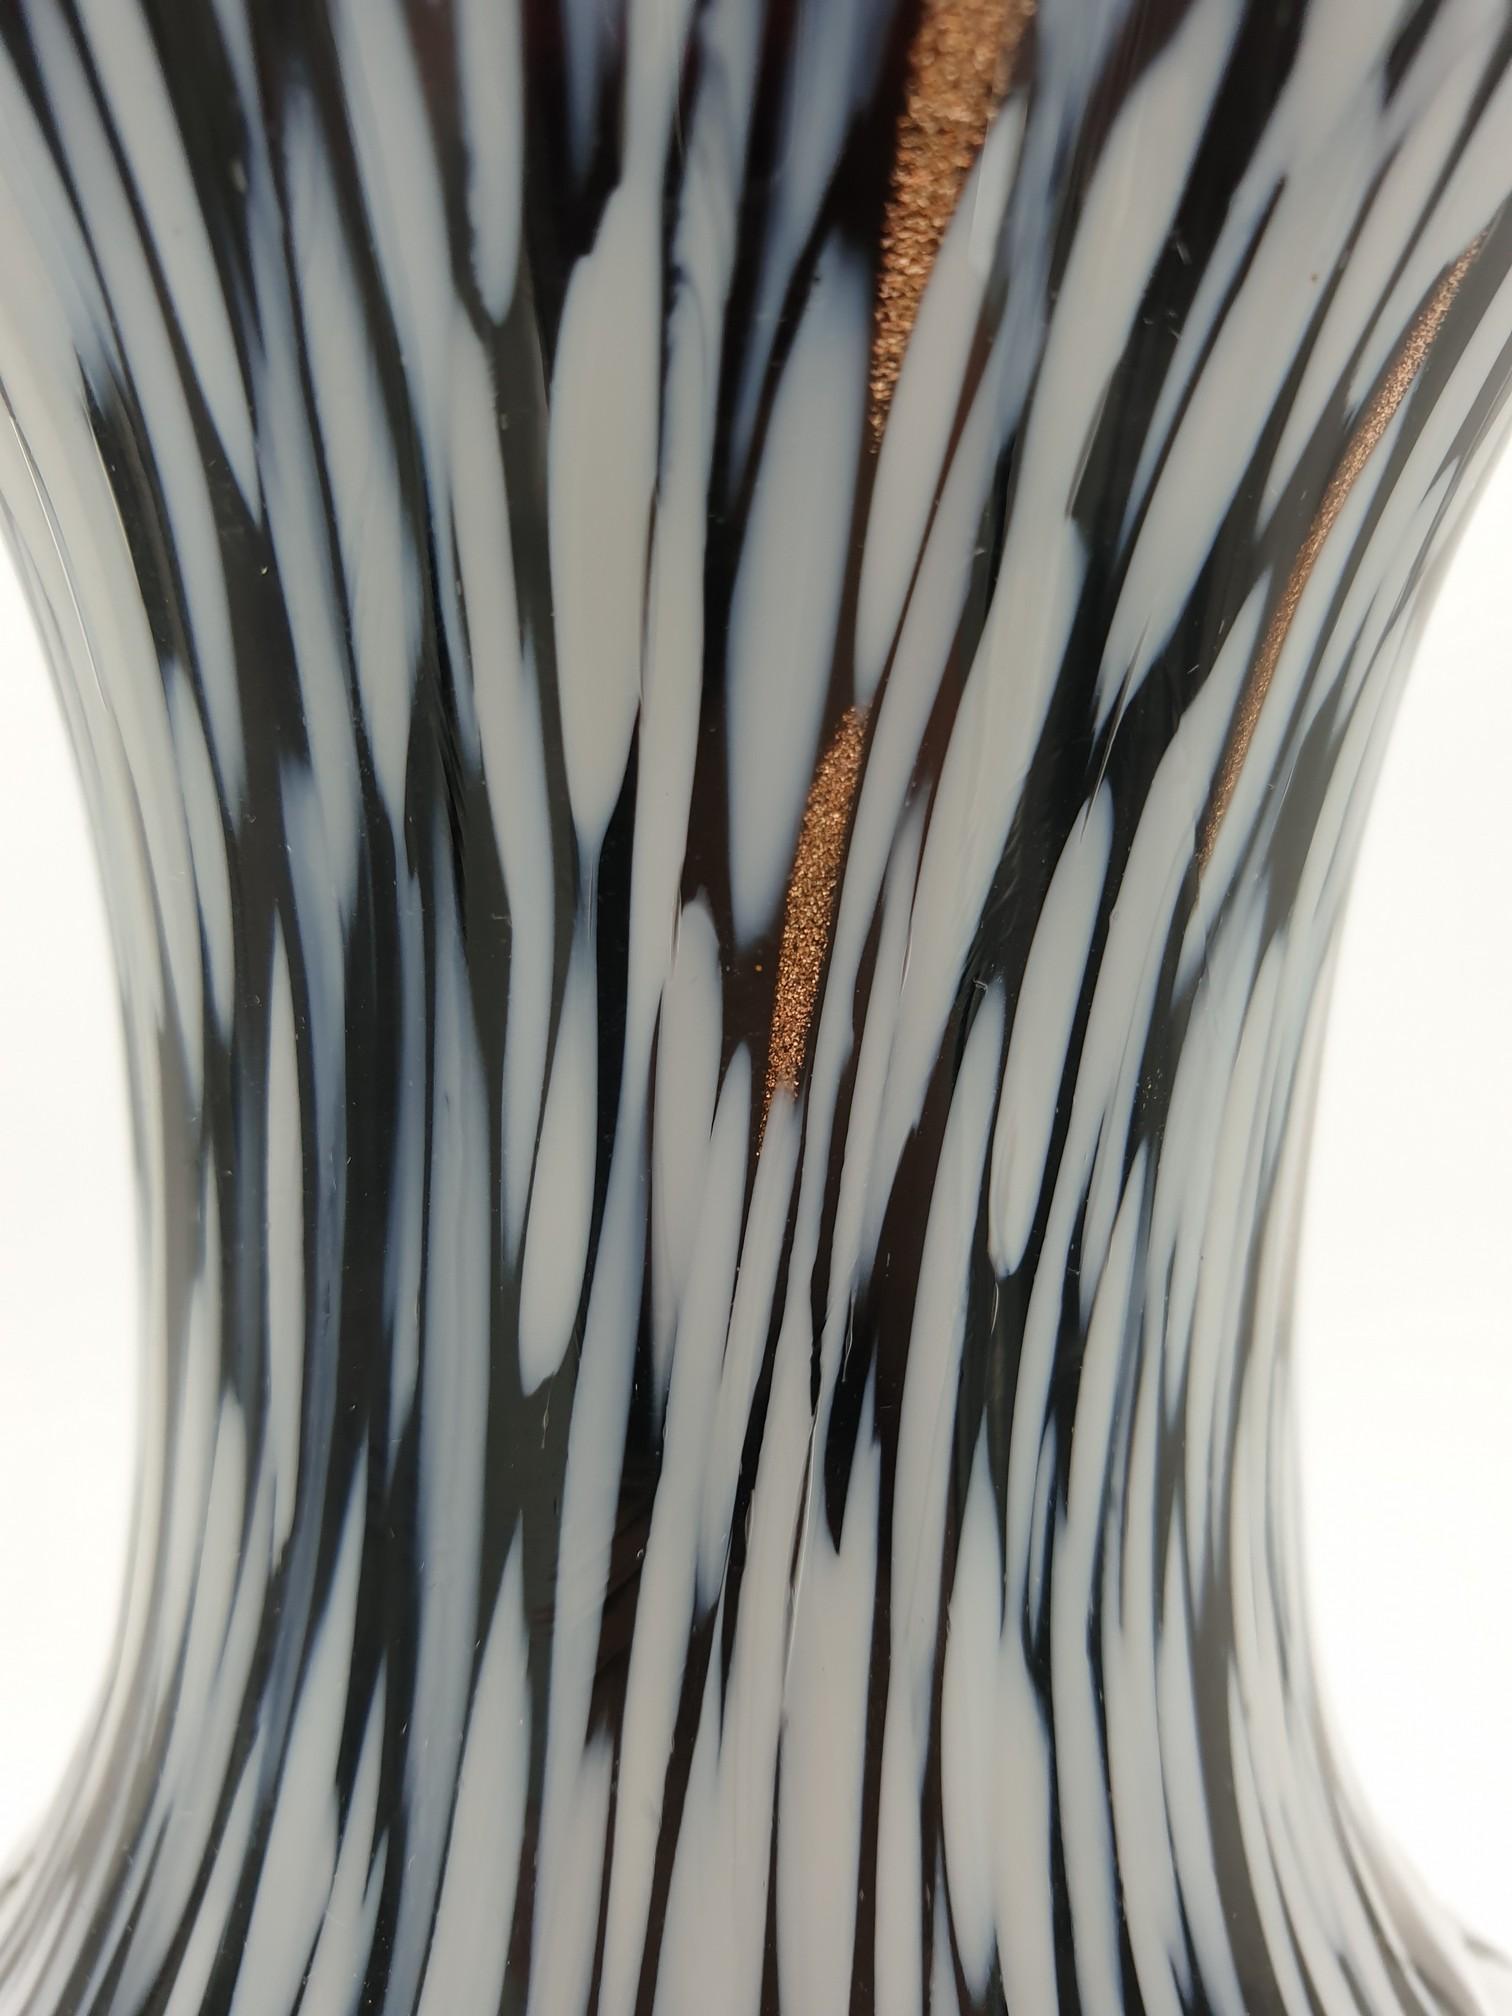 Vintage Murano Glass Vase in Black Color with White Spots by Cenedese, 1970s For Sale 2